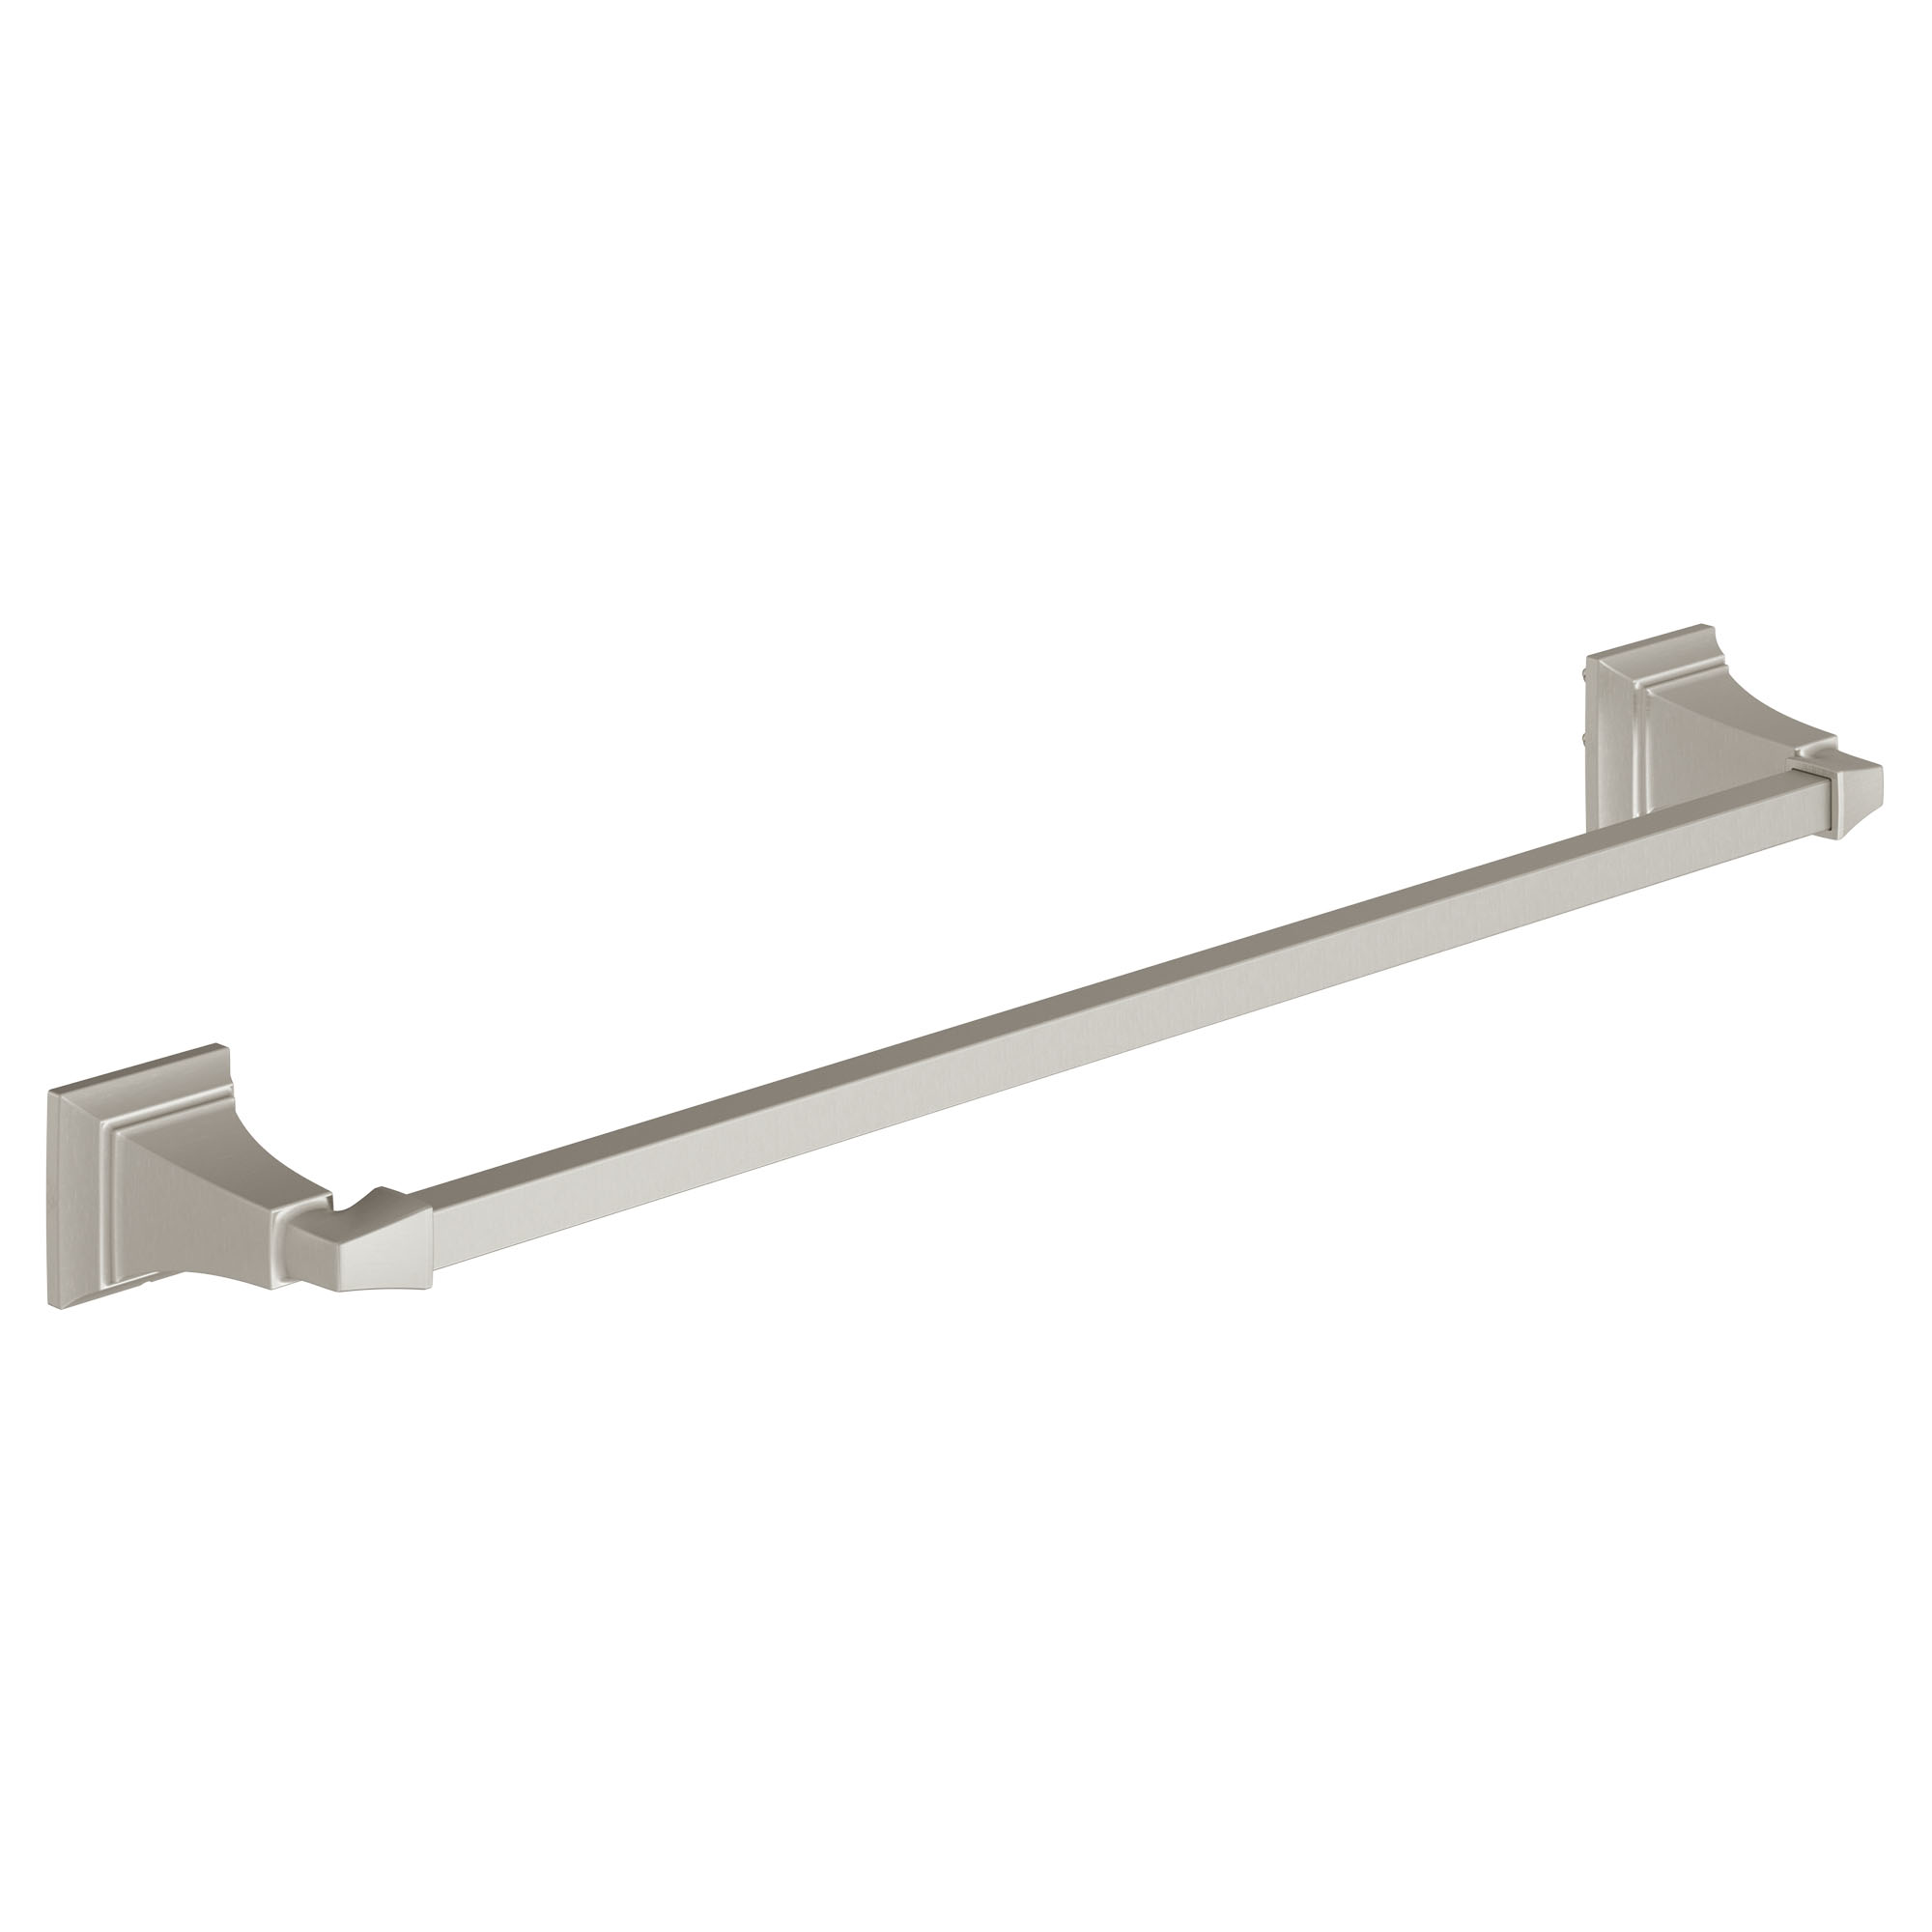 Town Square™ S 24-Inch Towel Bar